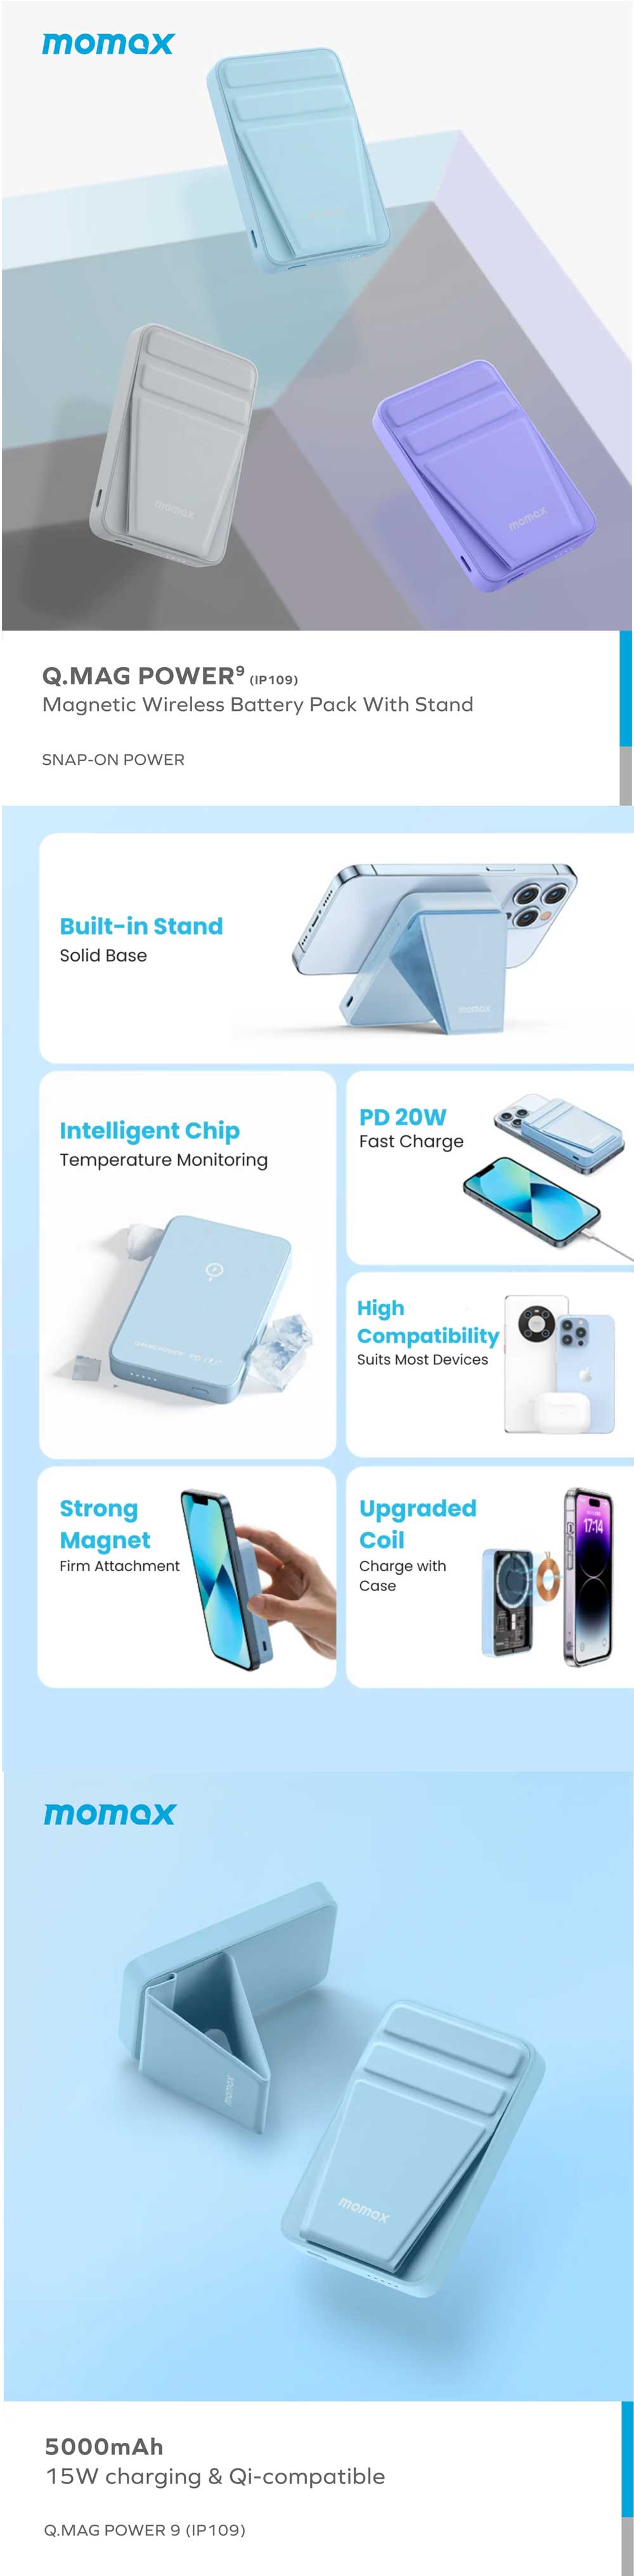 Momax Q.Mag Power 9 PD 20W 5000mAh Magnetic Wireless Charging Power Bank with Stand IP109 5